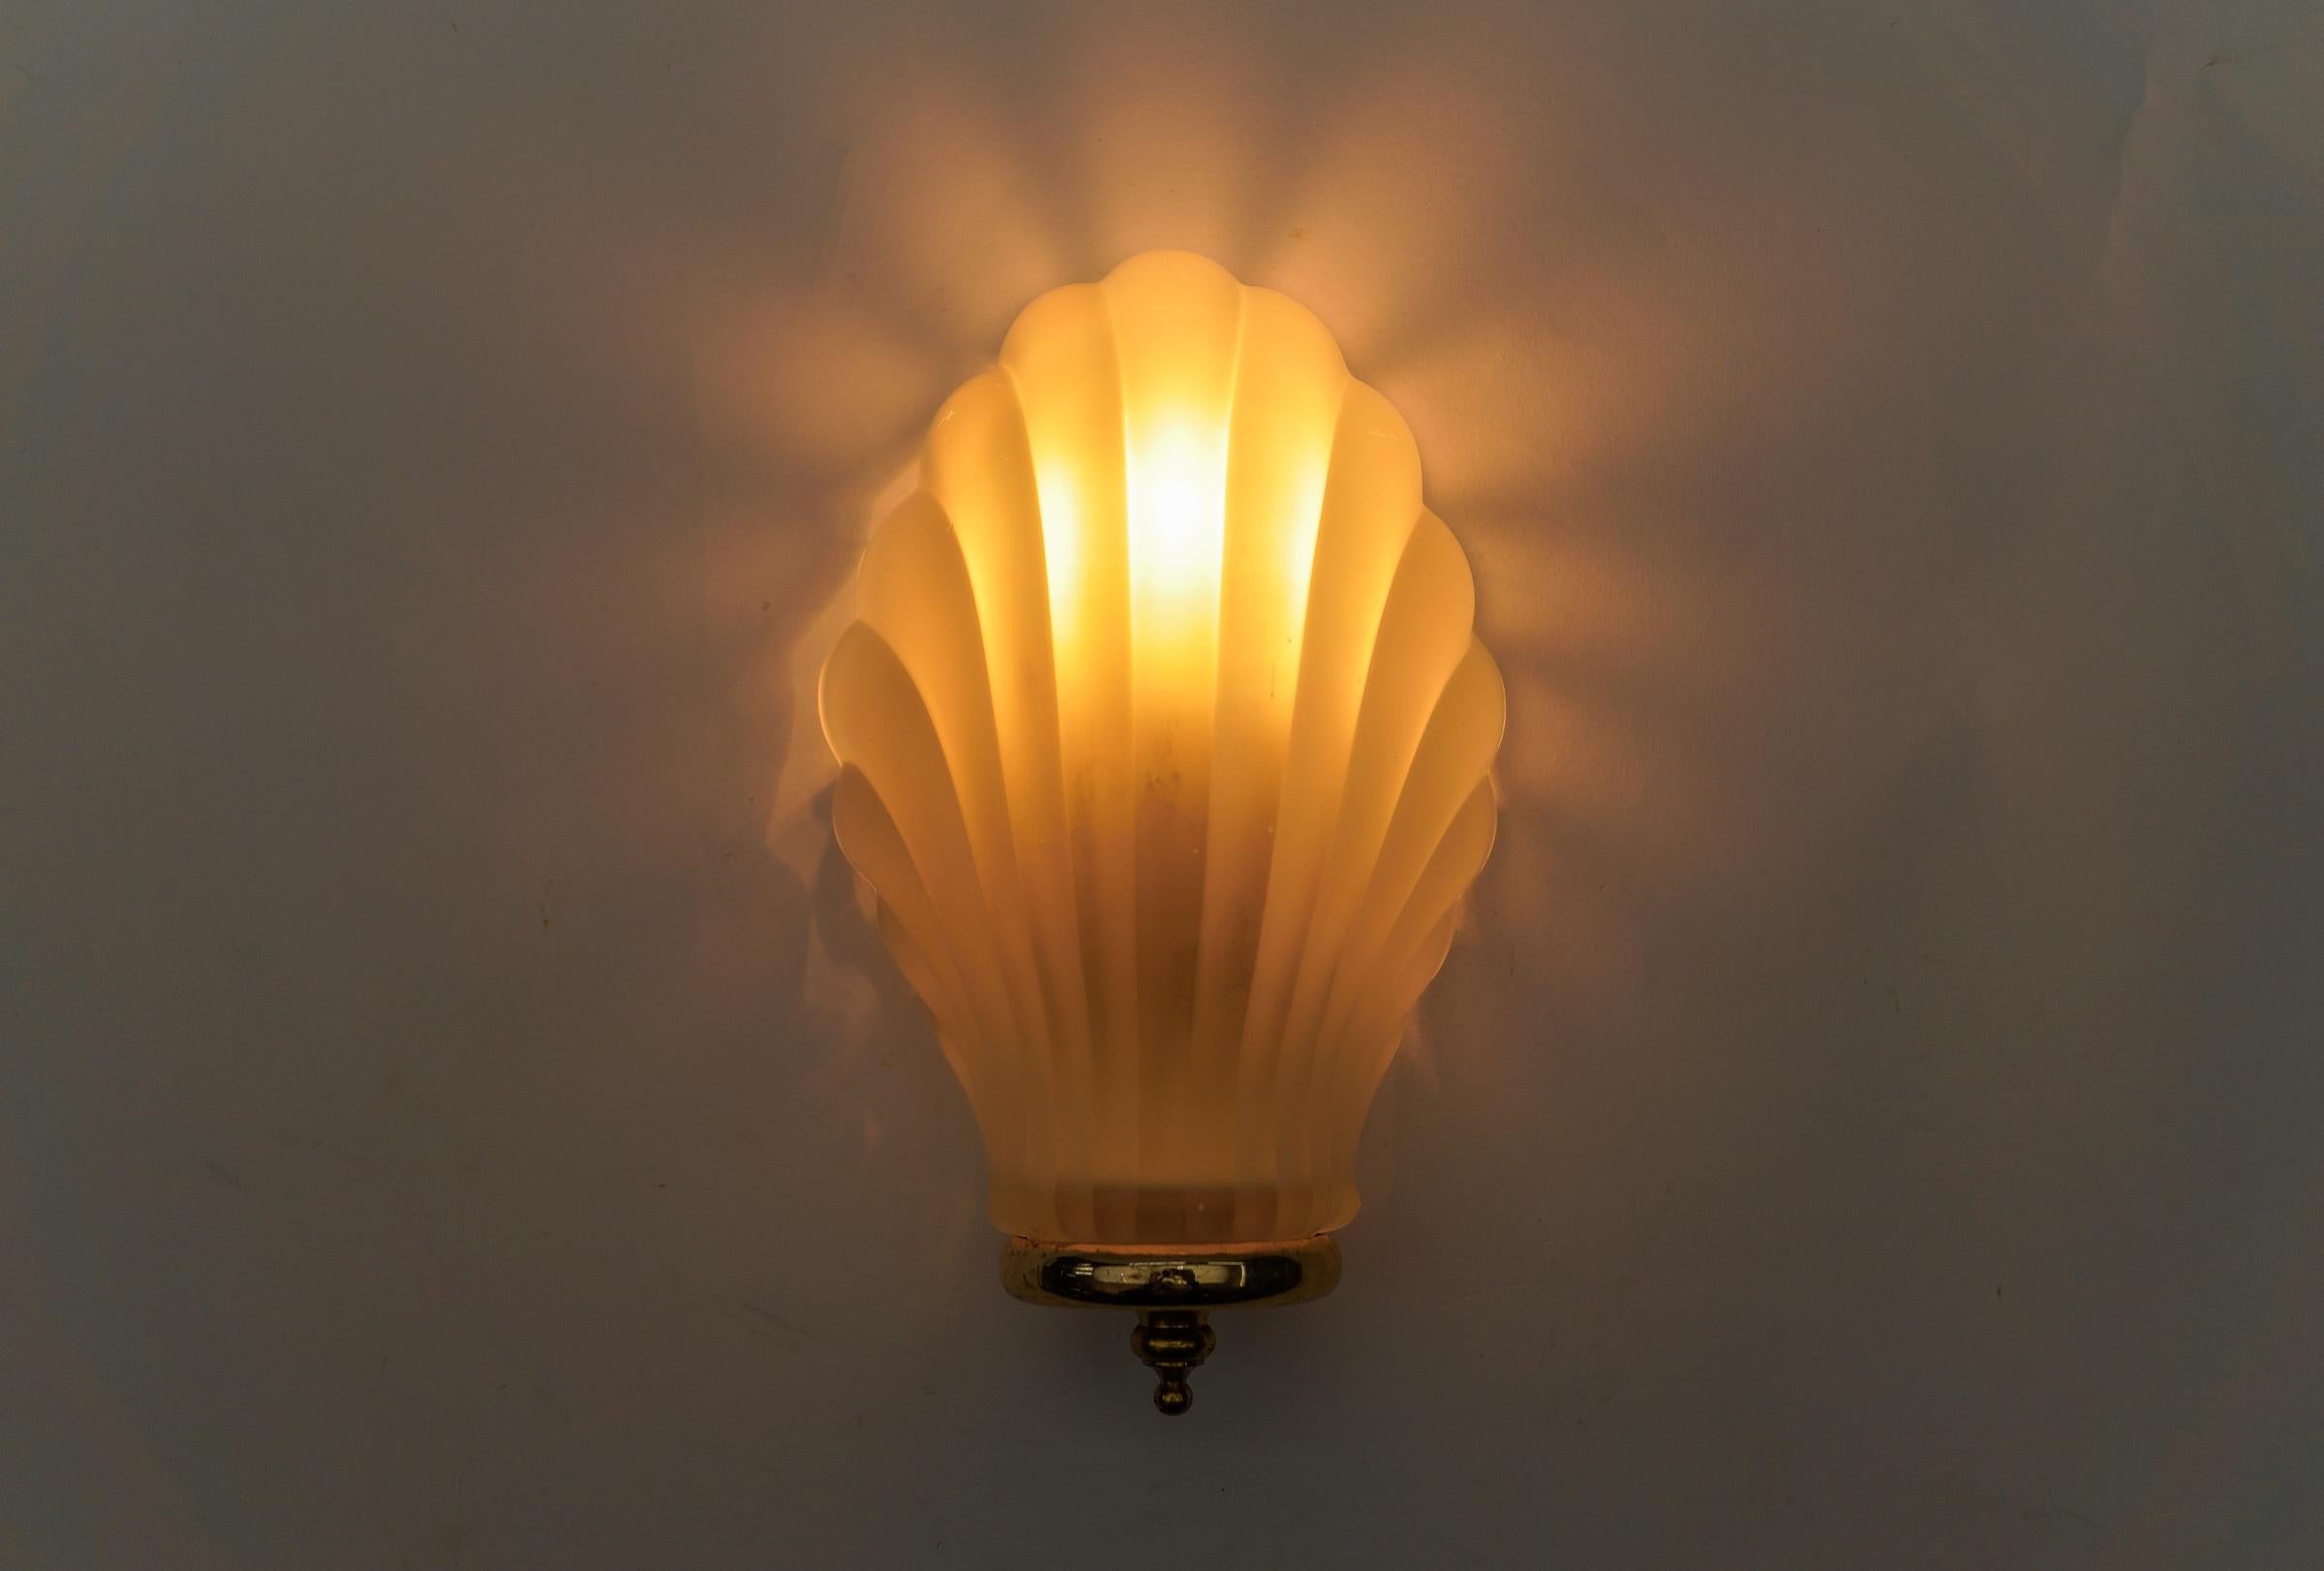 Satin Elegant Glass Shell Wall Light, 1960s Italy  

Executed in satin glass and metal. 

This lamp need 1 x E14 / E15 Edison screw fit bulb is wired, in working condition and runs both on 110 / 230 volt. Dimmable.

Our lamps are checked, cleaned